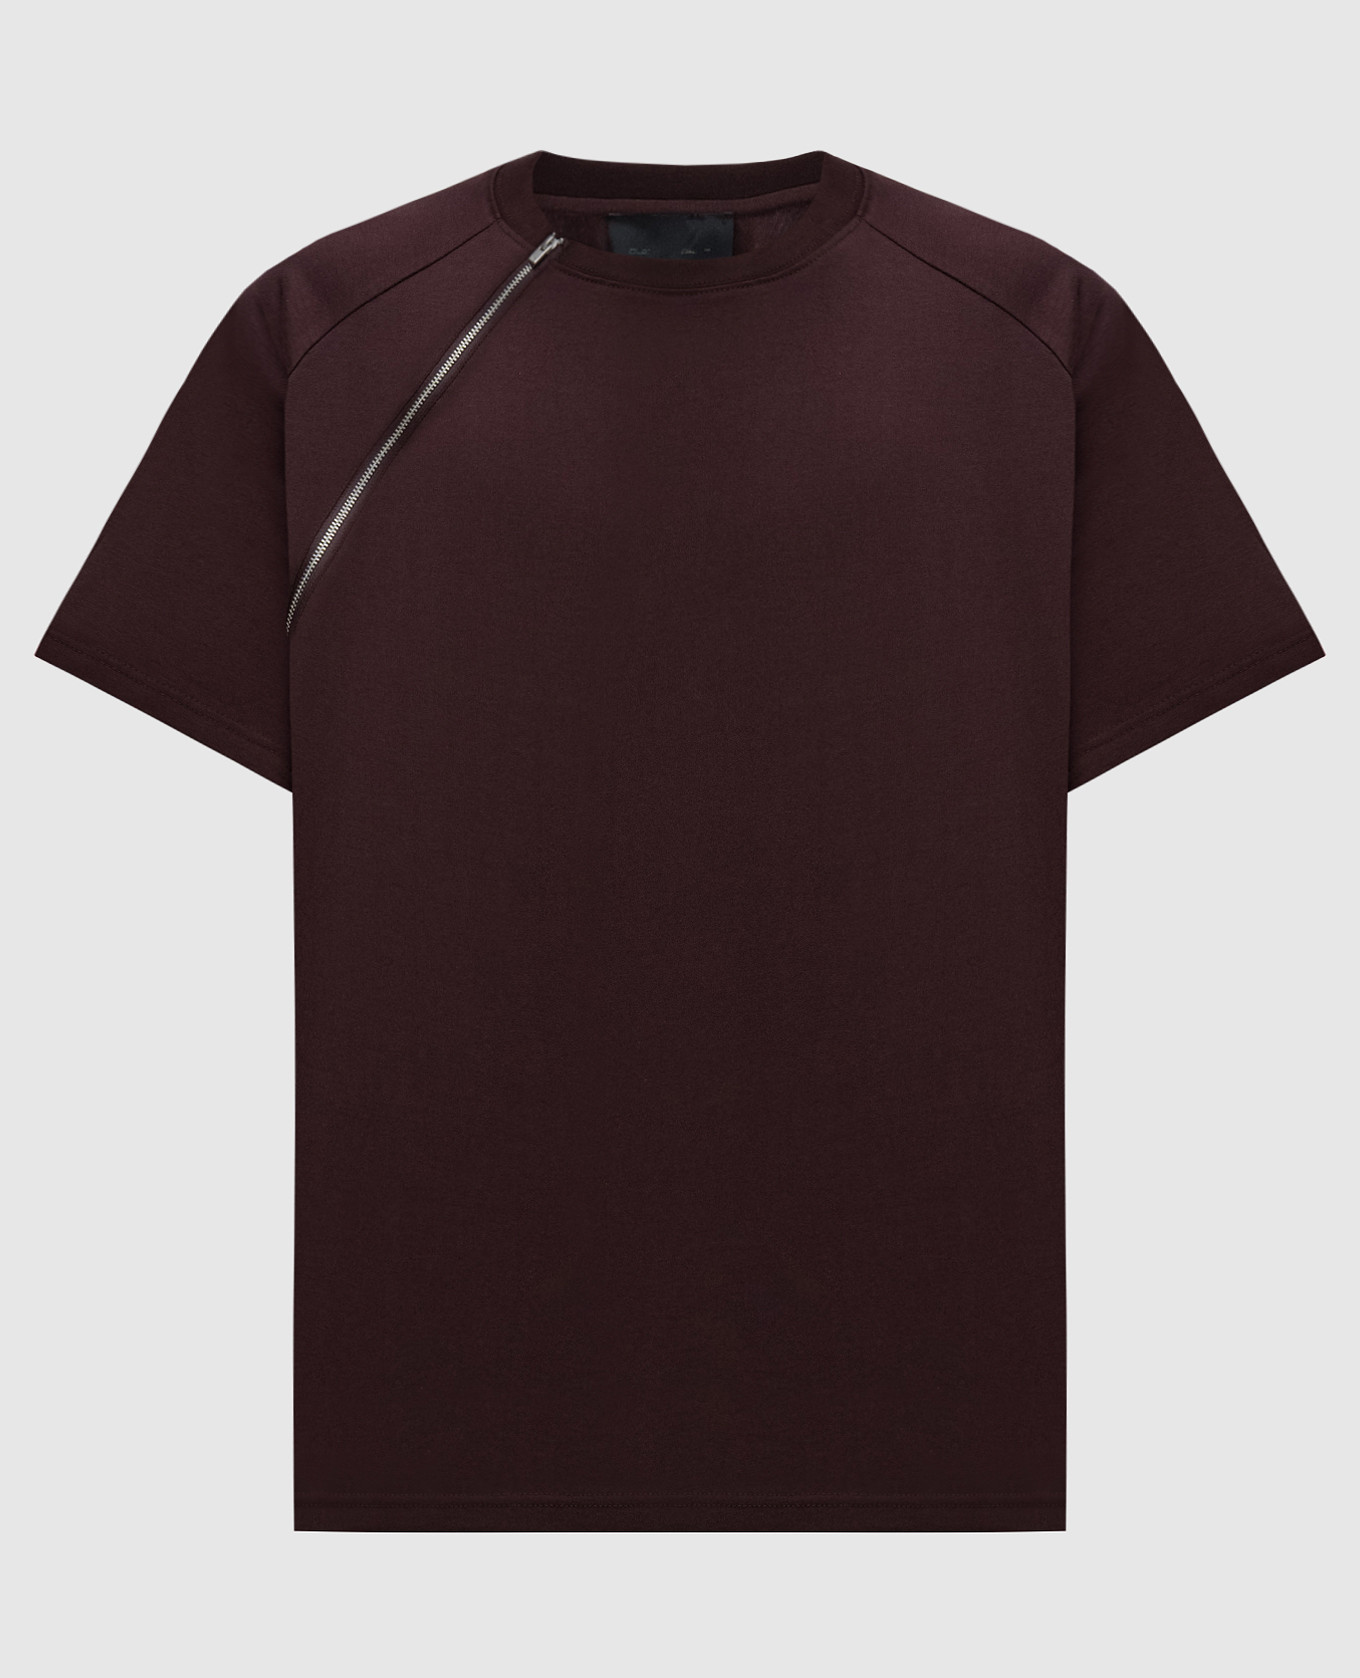 Sequence Zip T-Shirt in Brown